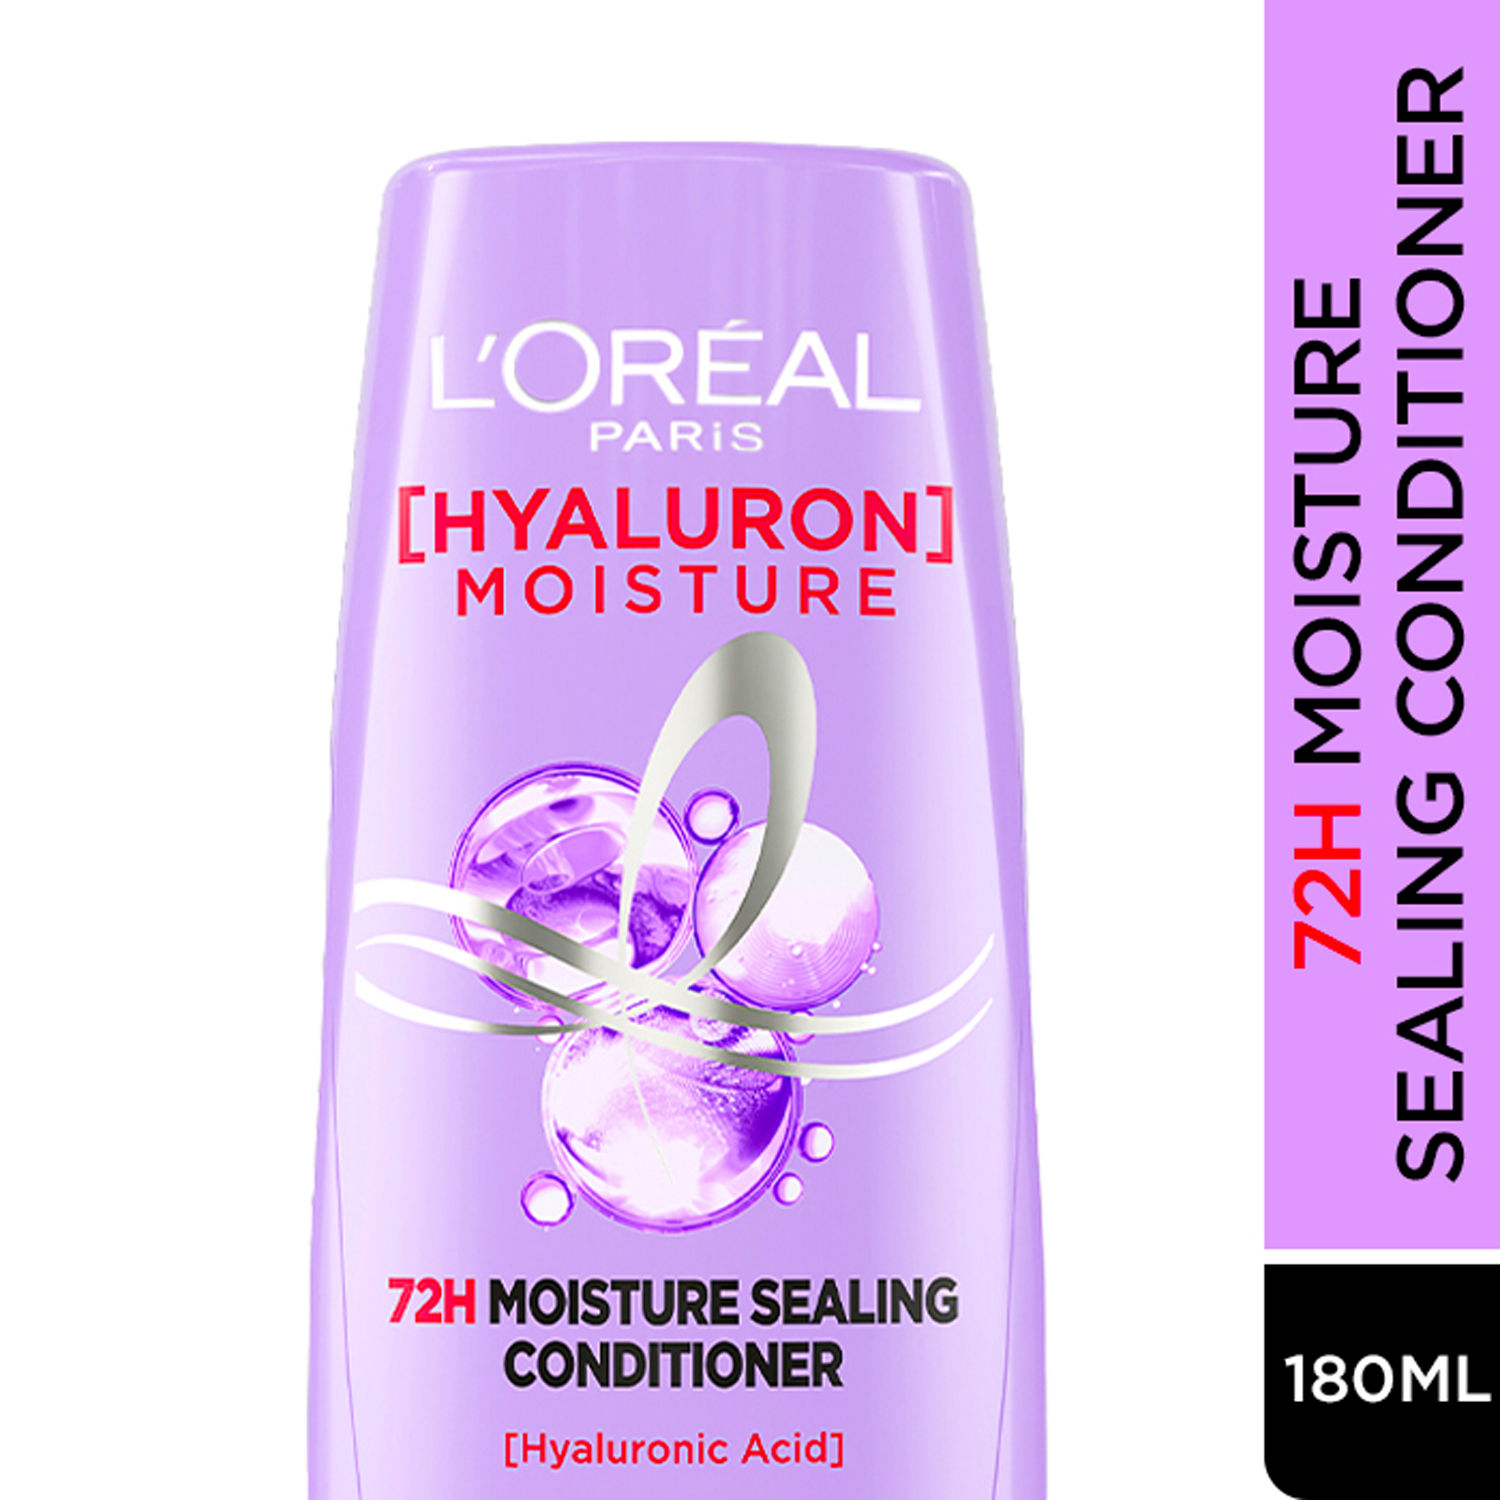 Buy L'Oreal Paris Hyaluron Moisture 72H Moisture Sealing Conditioner | With Hyaluronic Acid | For Dry & Dehydrated Hair | Adds Shine & Bounce 180ml - Purplle